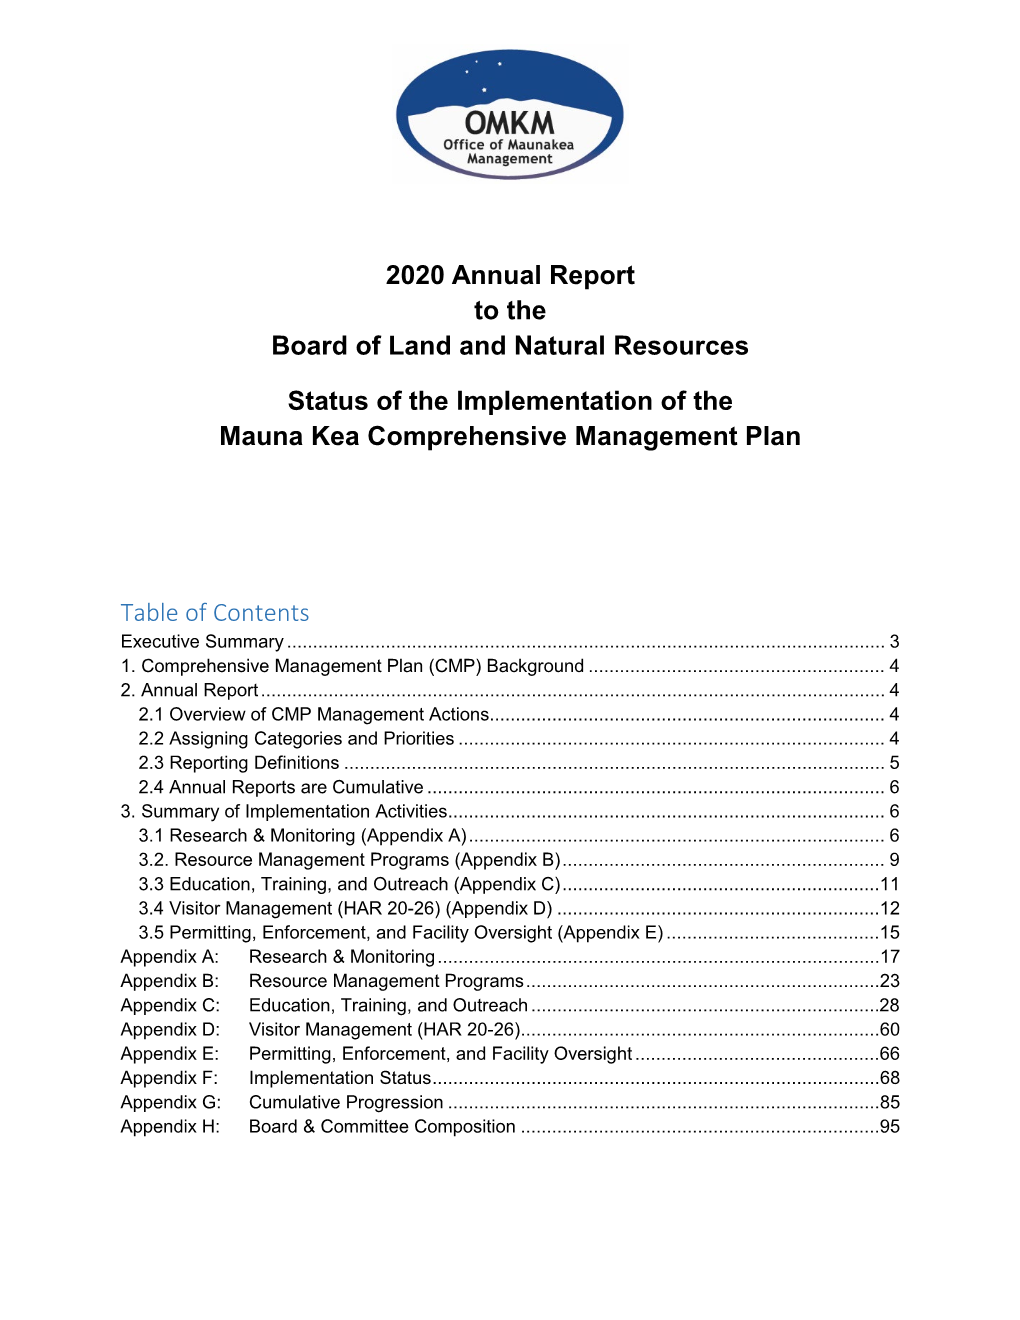 2020 Annual Report to the Board of Land and Natural Resources Status